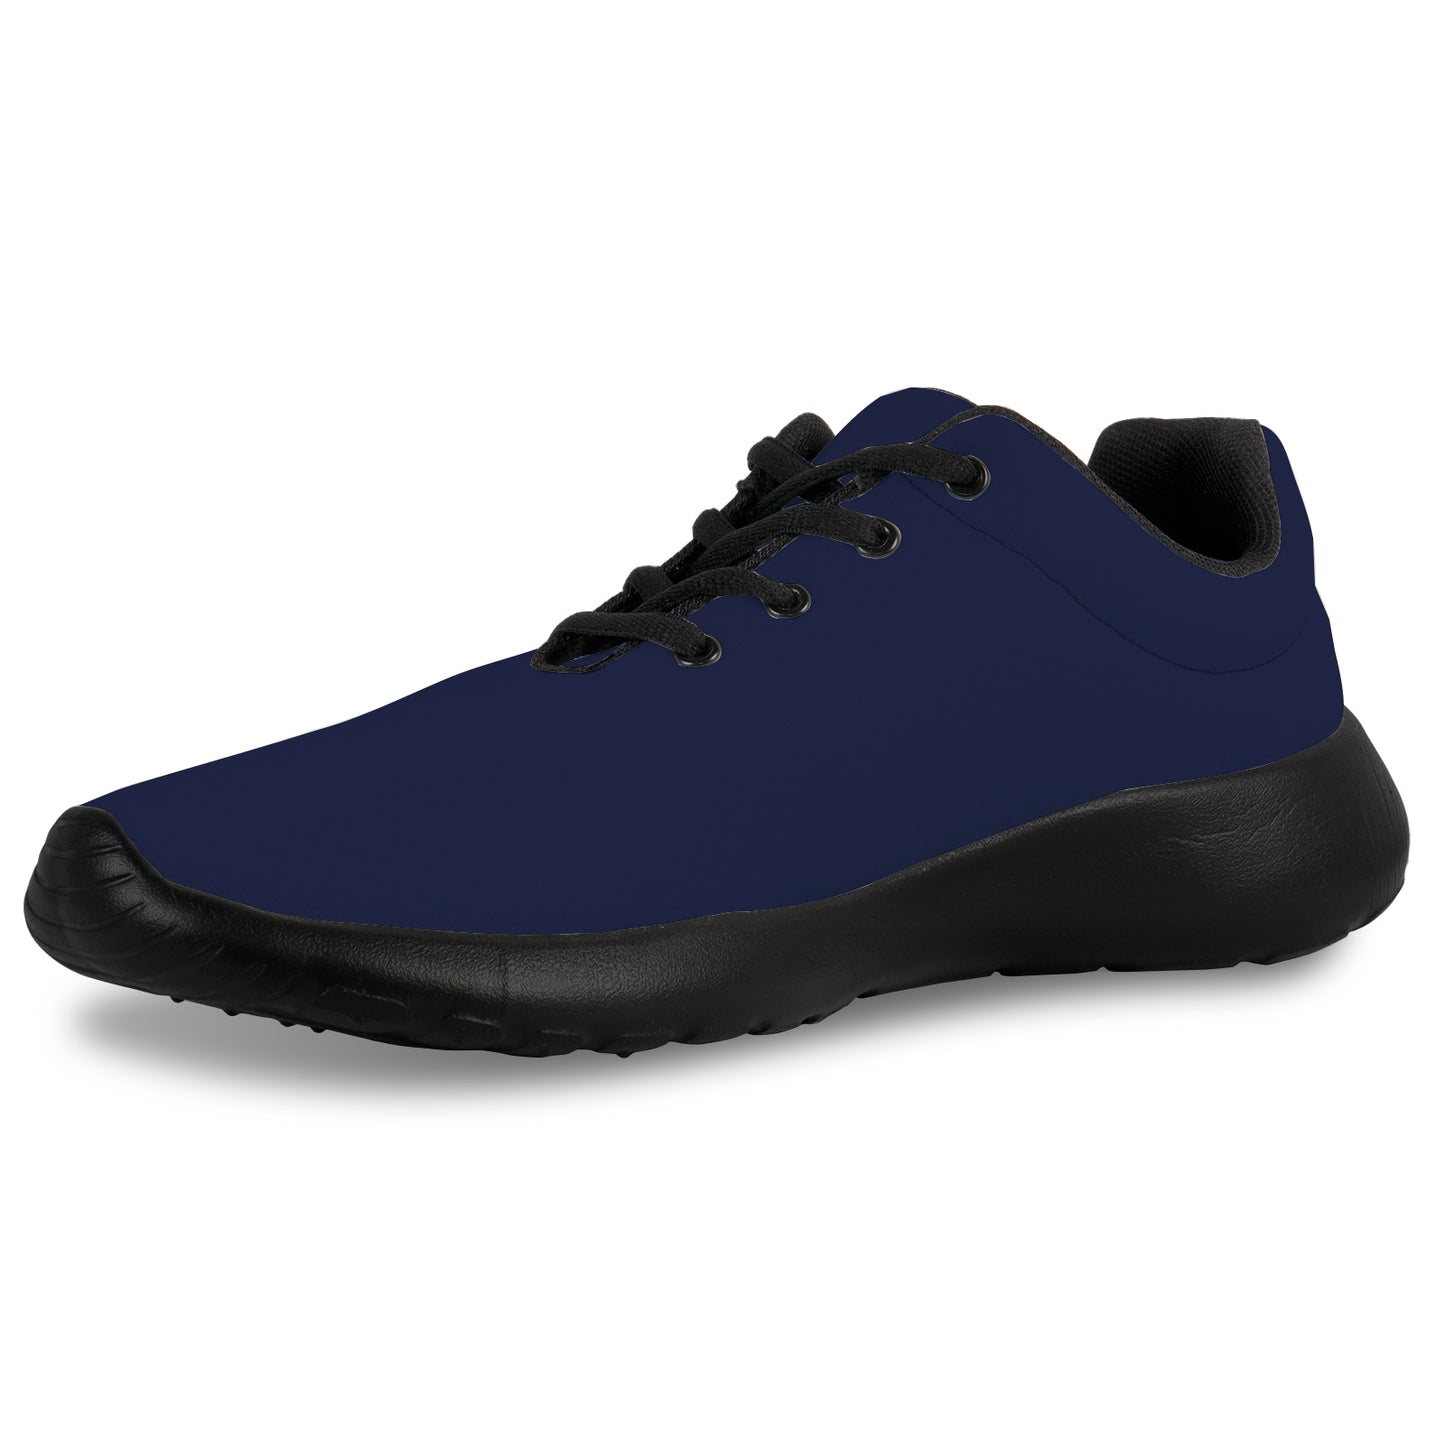 Women's Athletic Shoes - Classic Navy